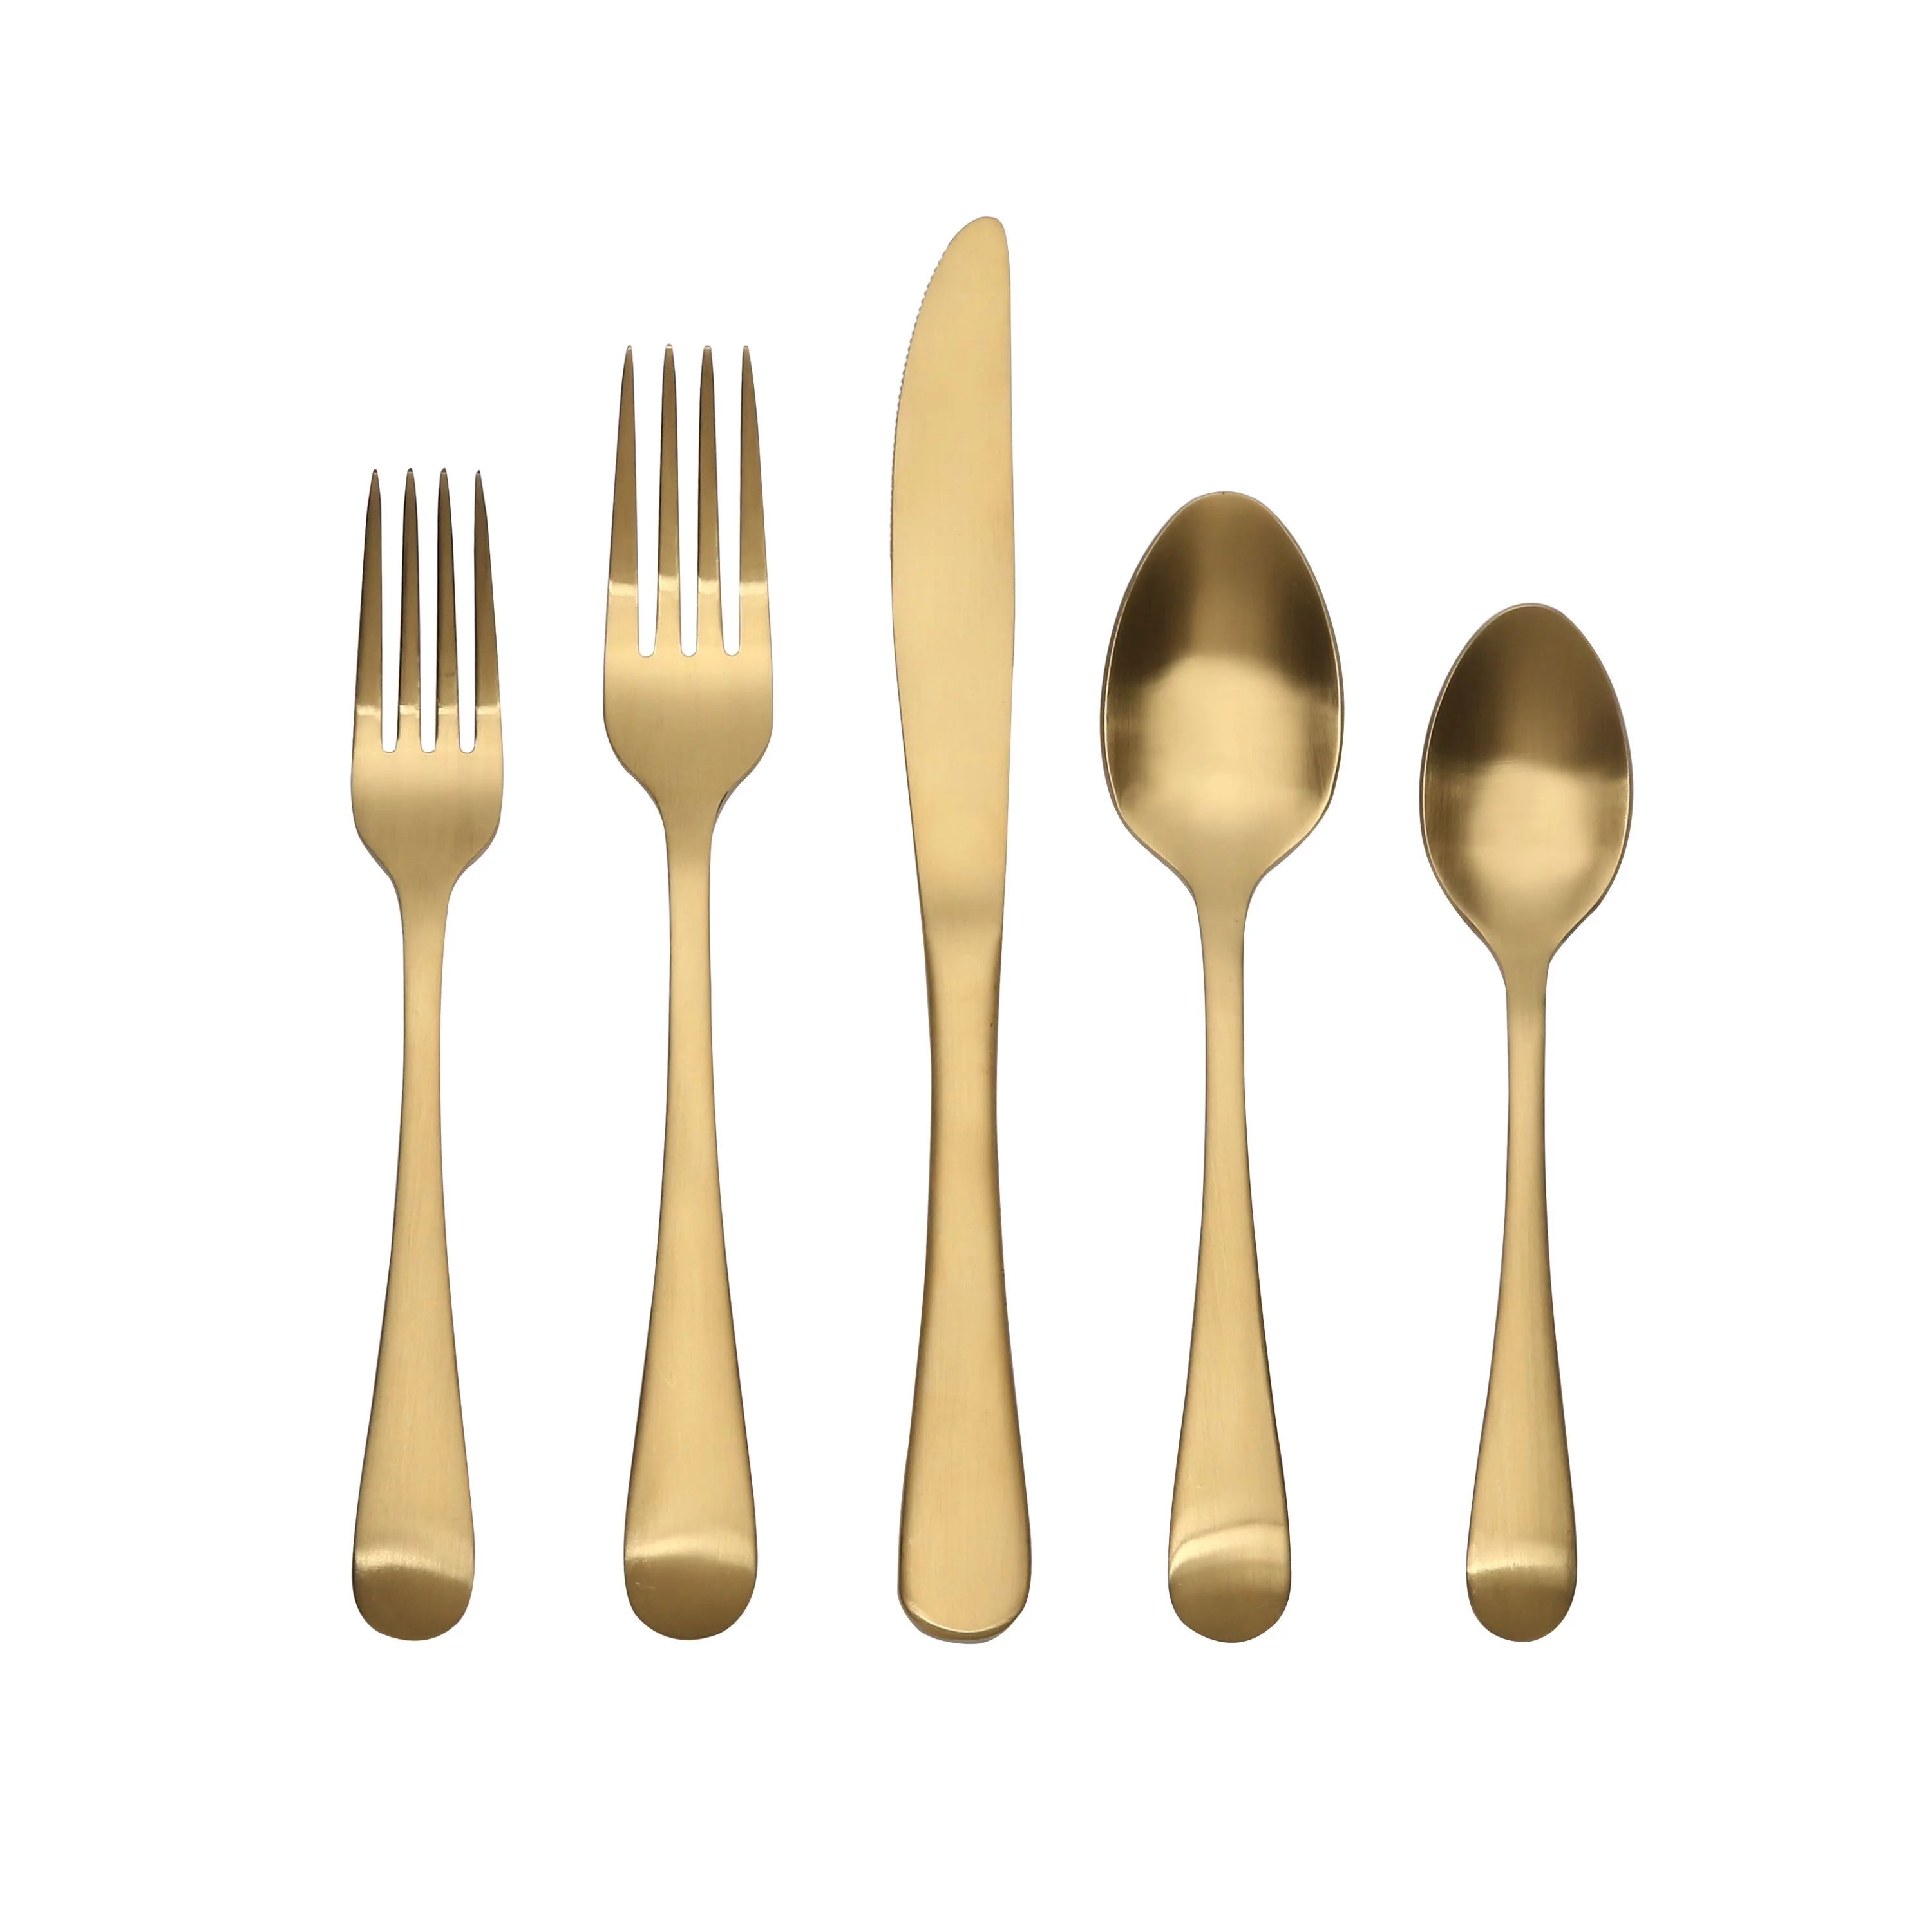 Better Homes & Gardens 20 Pieces Arlo Gold Flatware Set with Matte Finish, Service for 4 | Walmart (US)